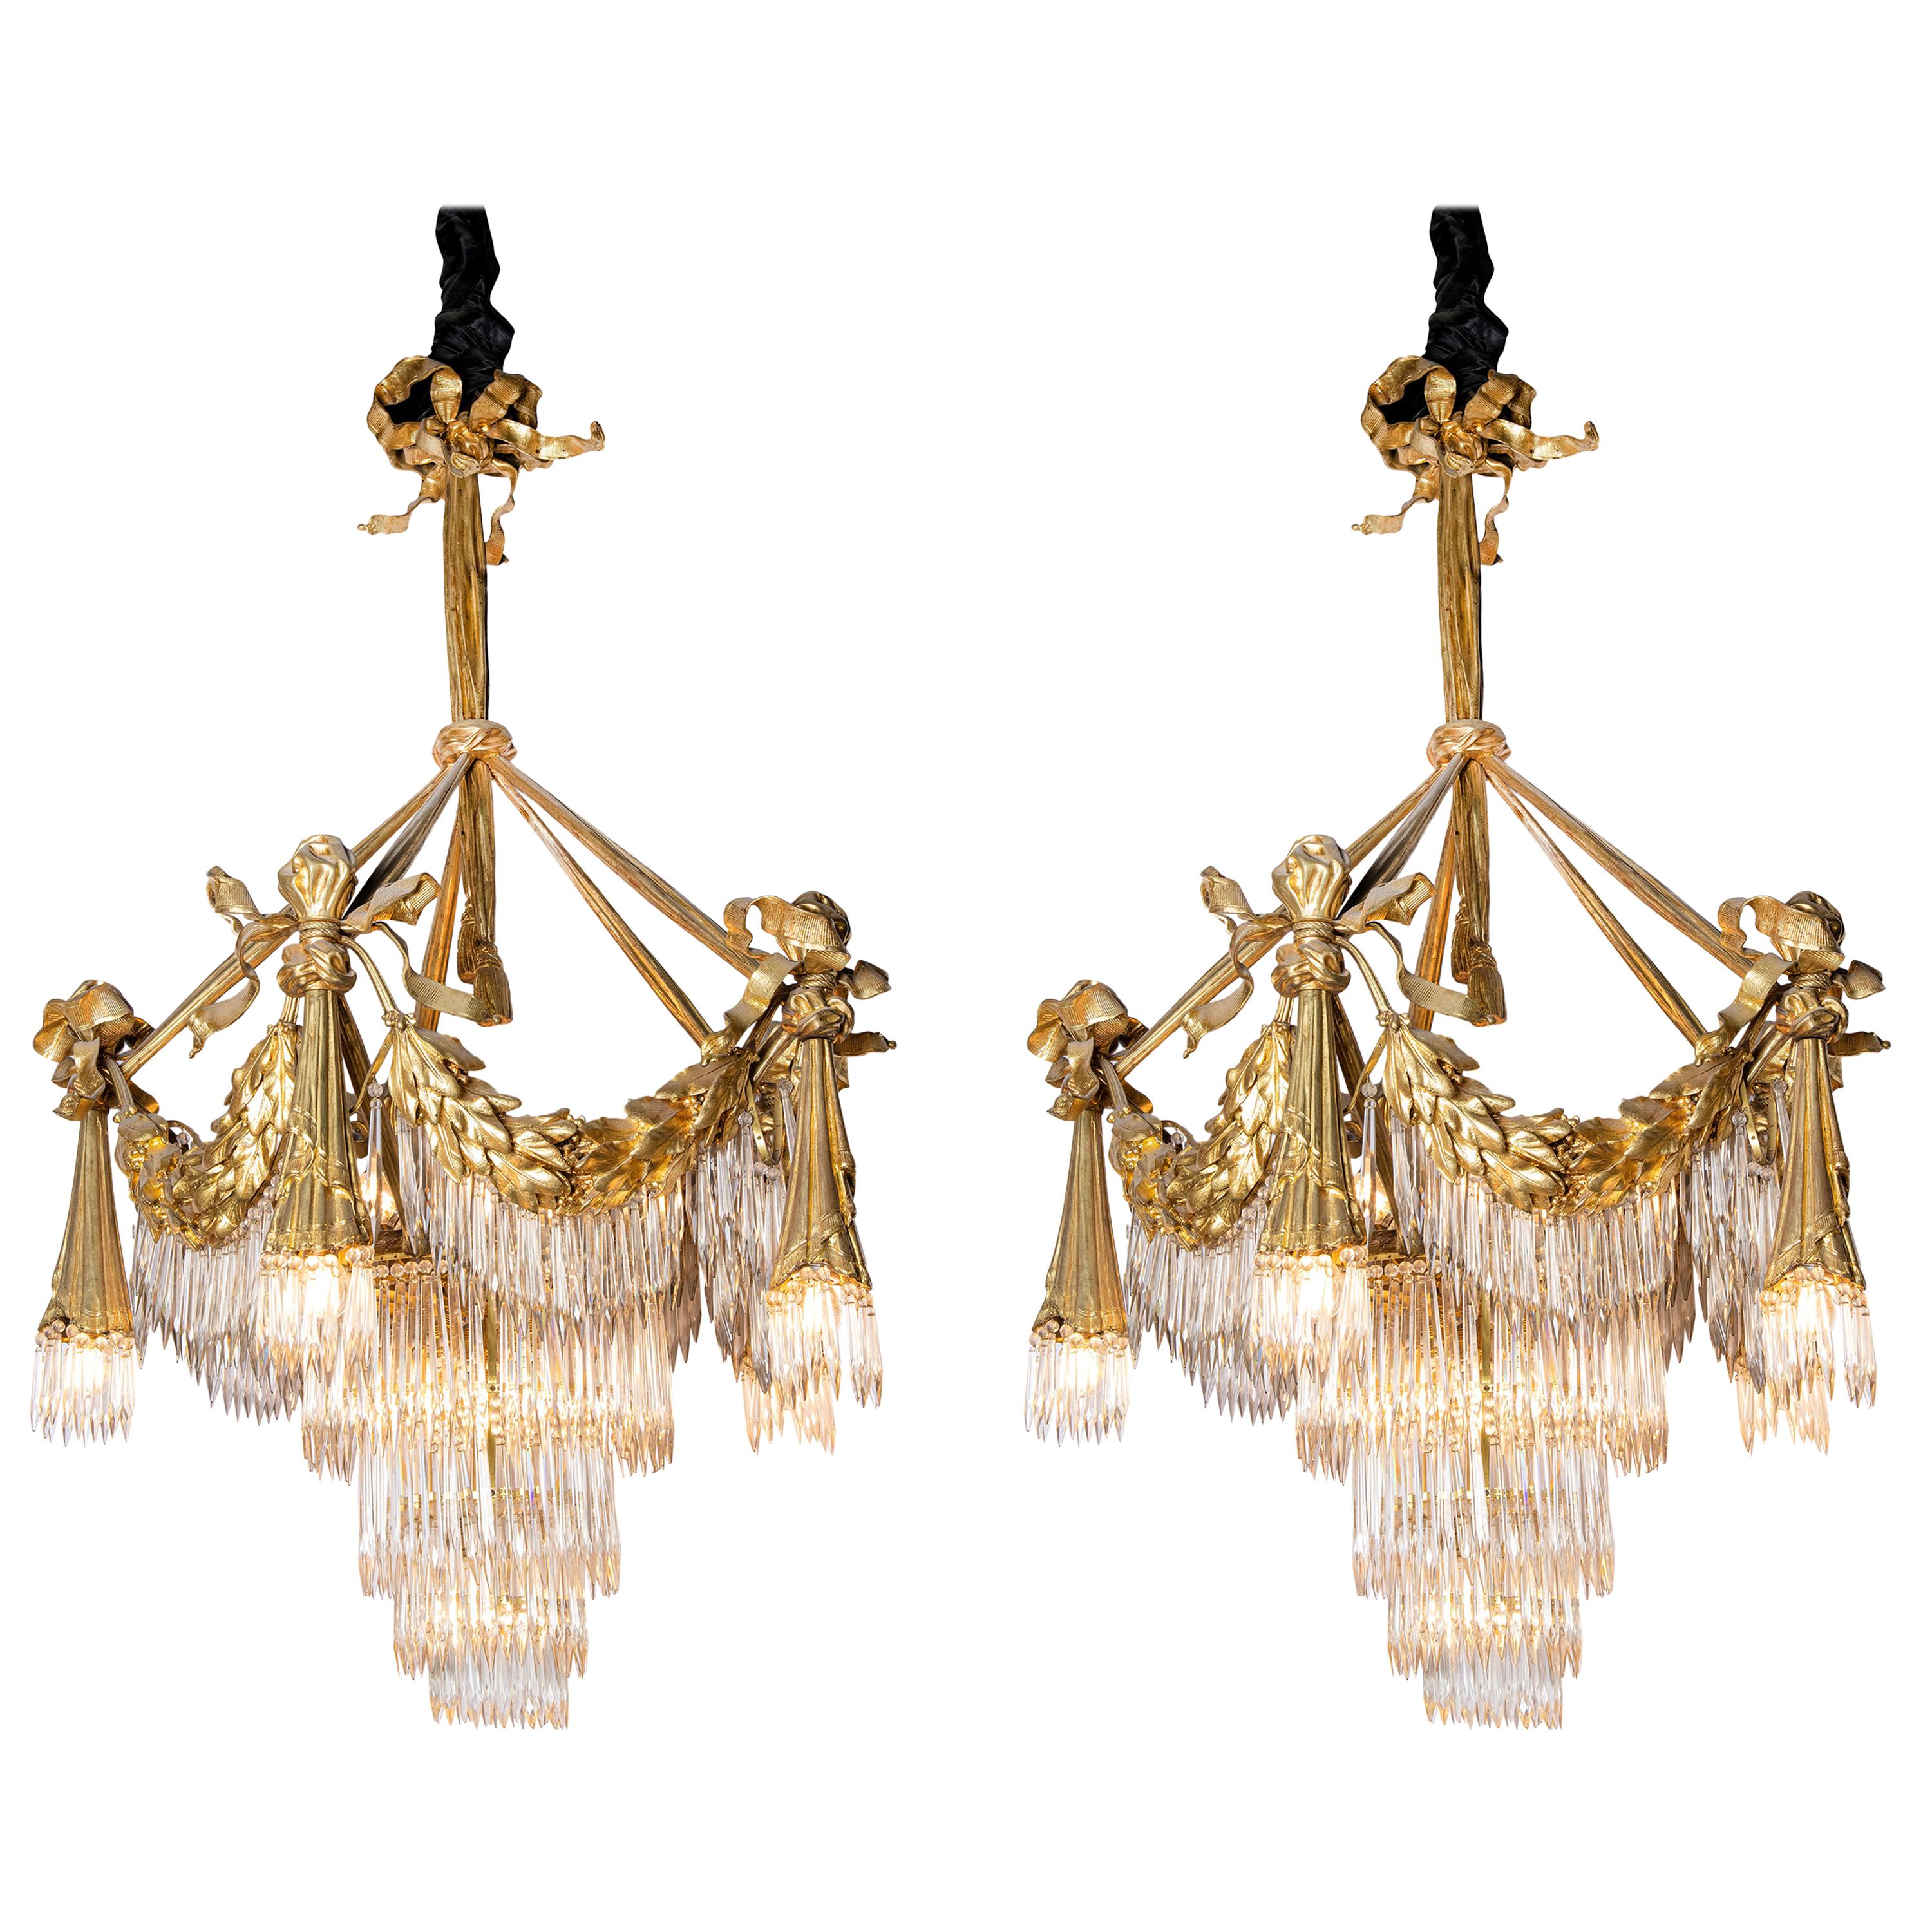 Pair of Ormolu Bronze and Baccarat Crystal Chandeliers, France, circa 1870 For Sale